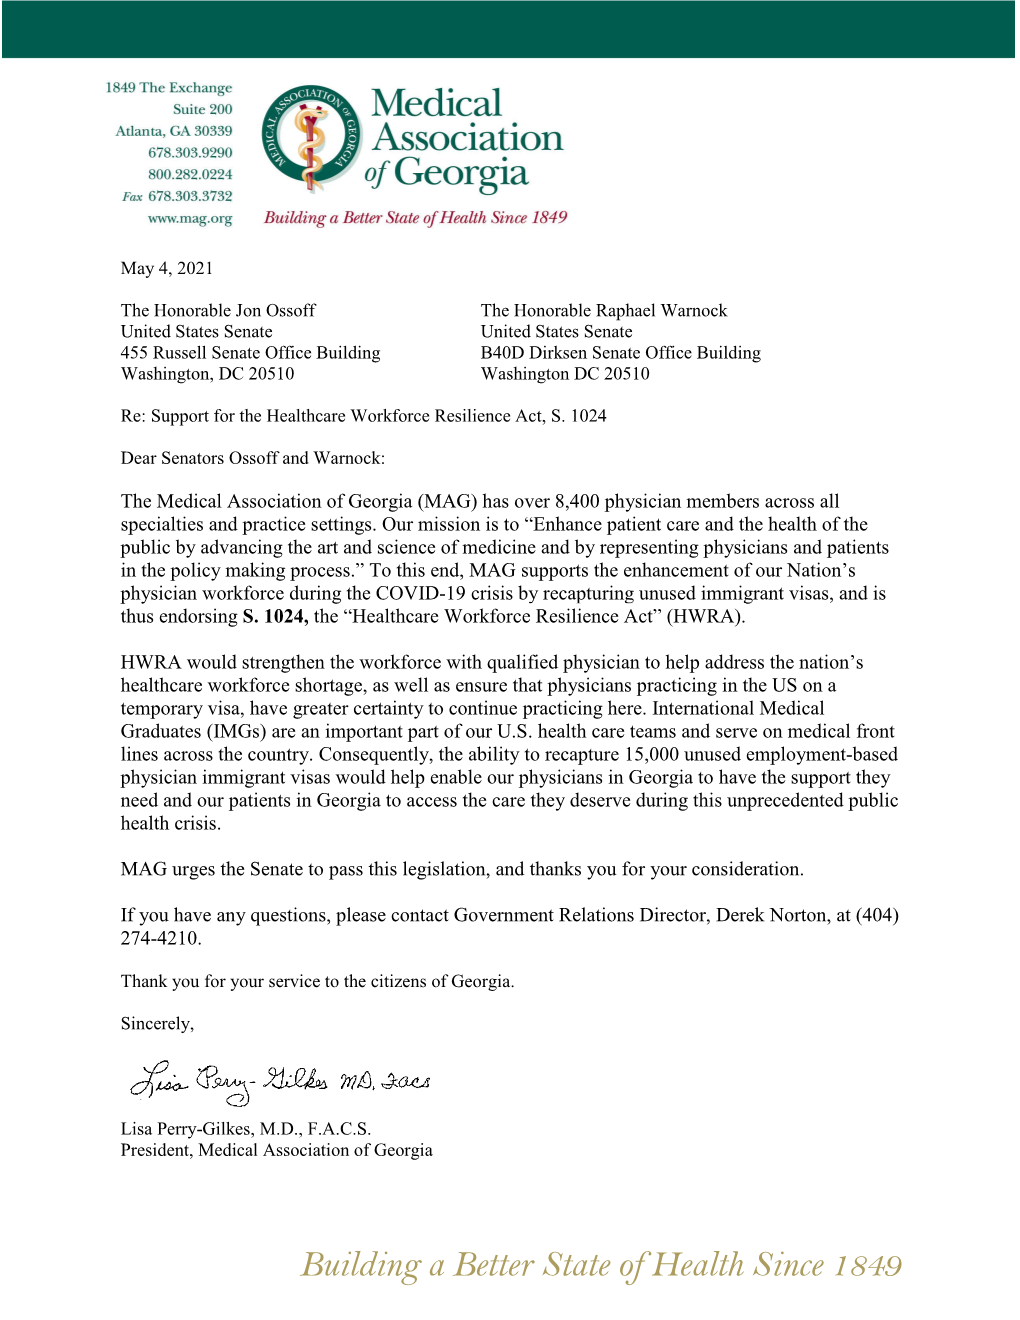 Medical Association of Georgia (MAG) Has Over 8,400 Physician Members Across All Specialties and Practice Settings